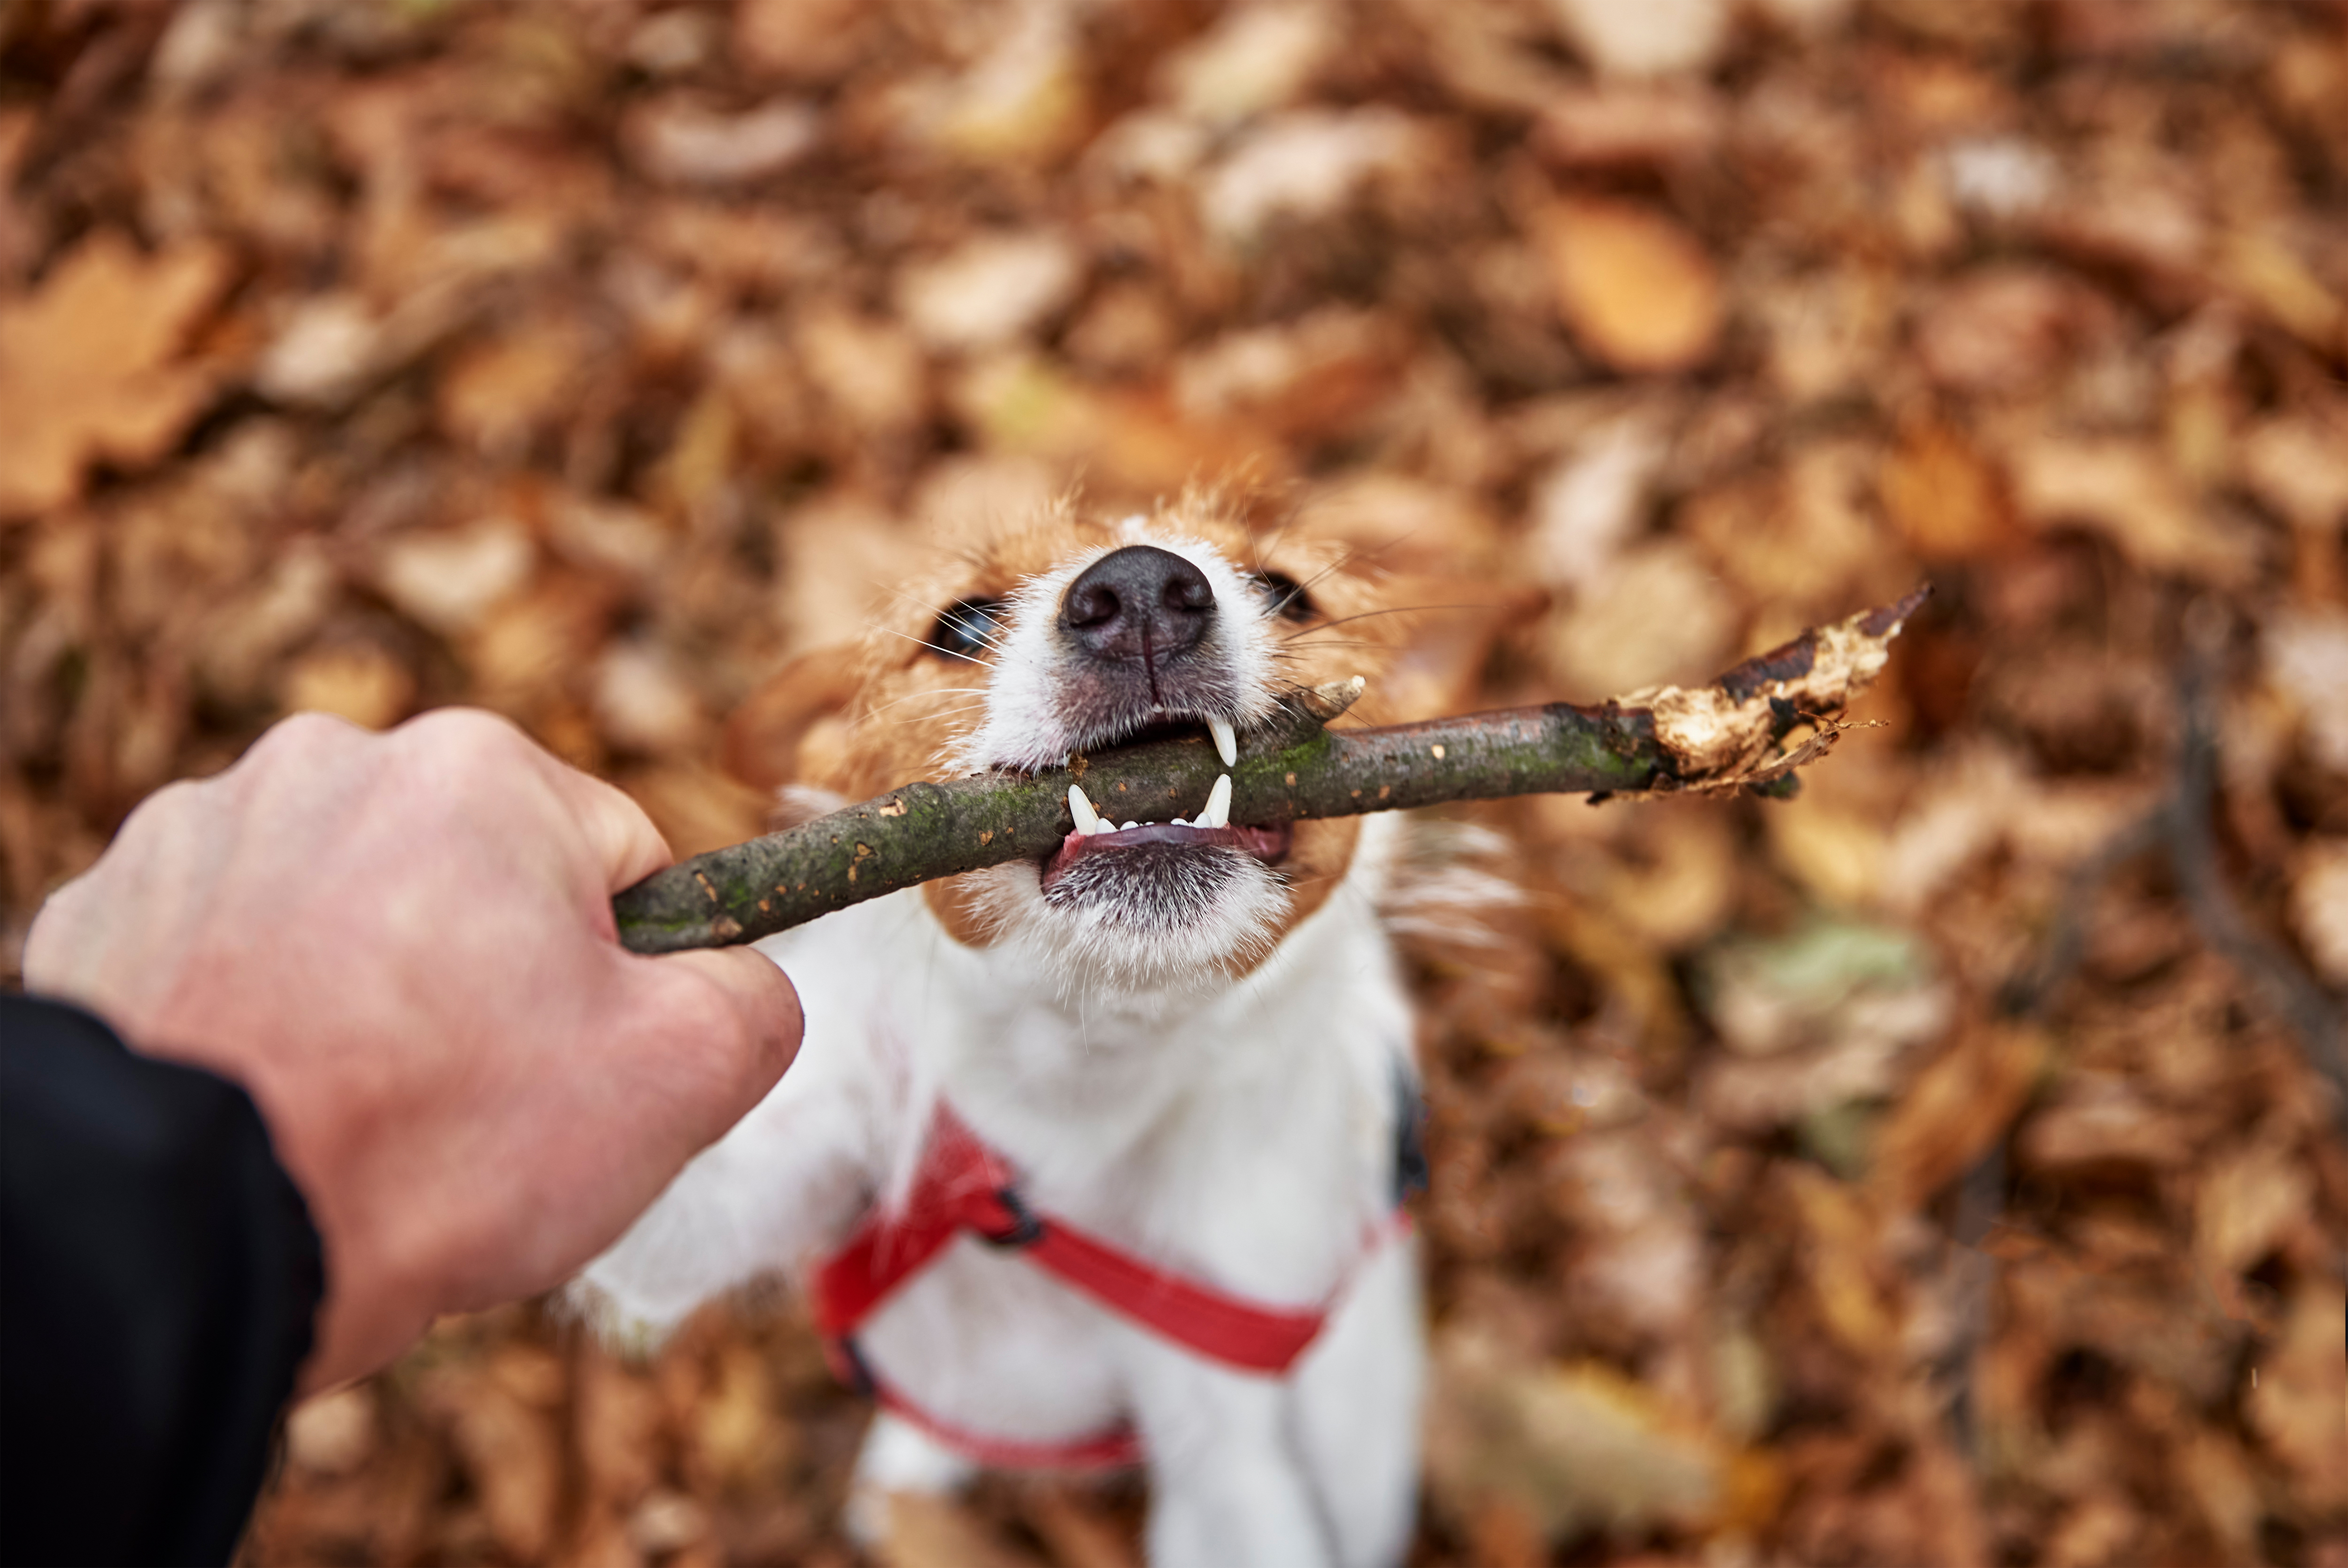 are tree sticks safe for dogs